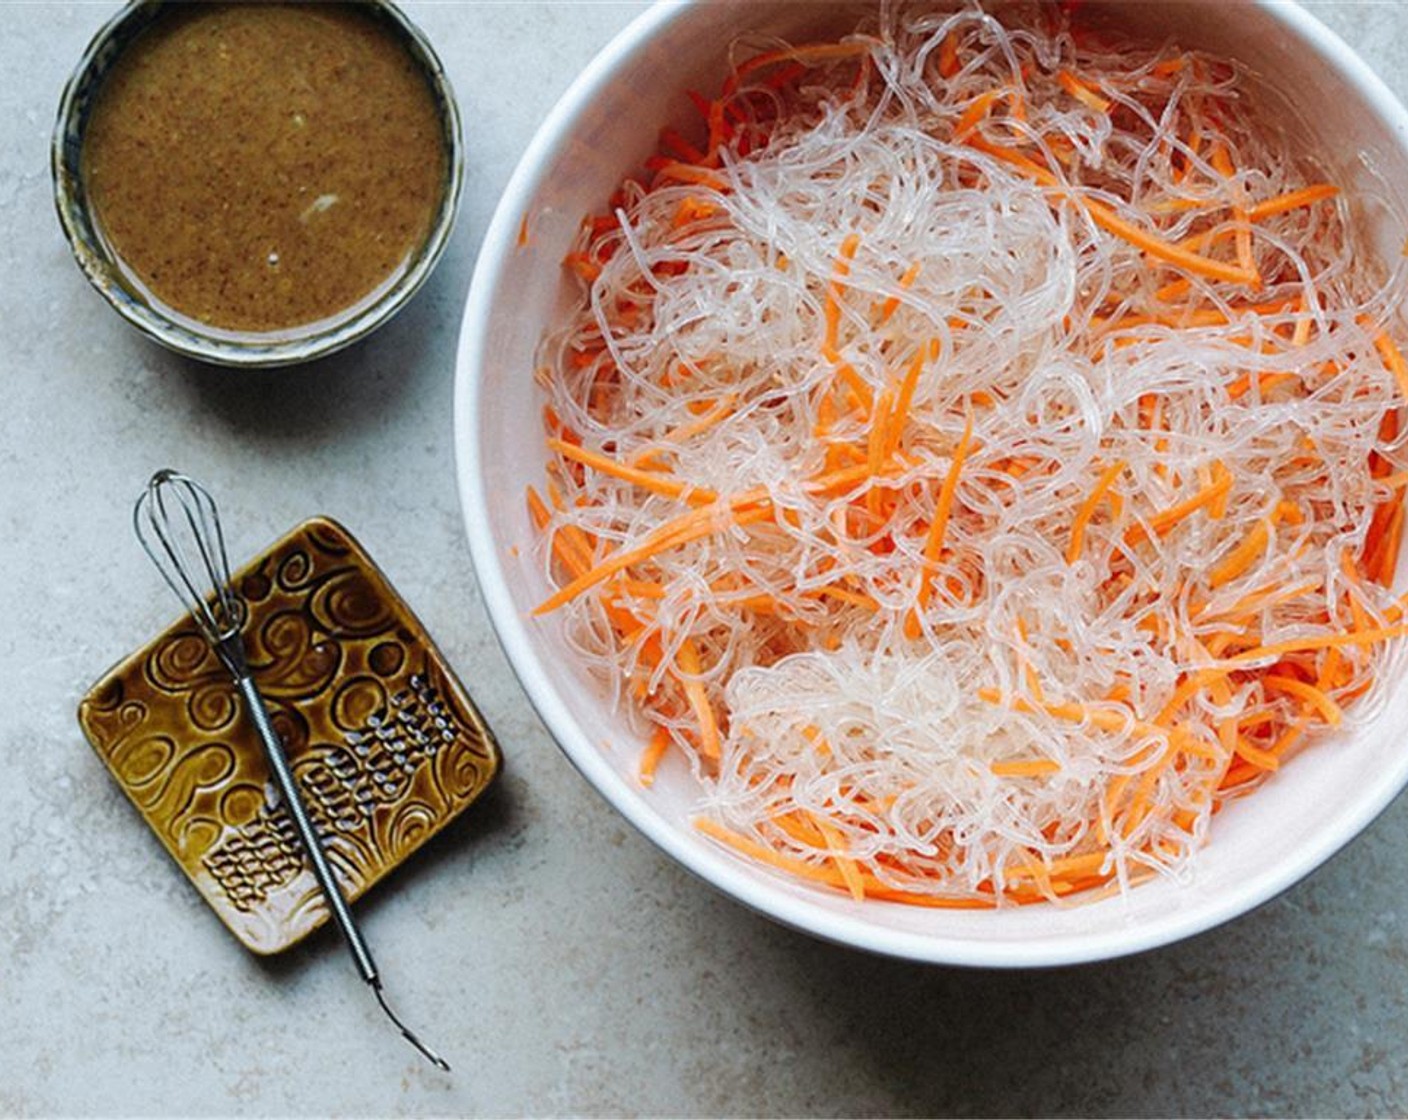 step 2 Rinse your Kelp Noodles (1 pckg) under cool running water. Add noodles and Carrots (2 cups) to a large bowl, add dressing and mix until well coated.